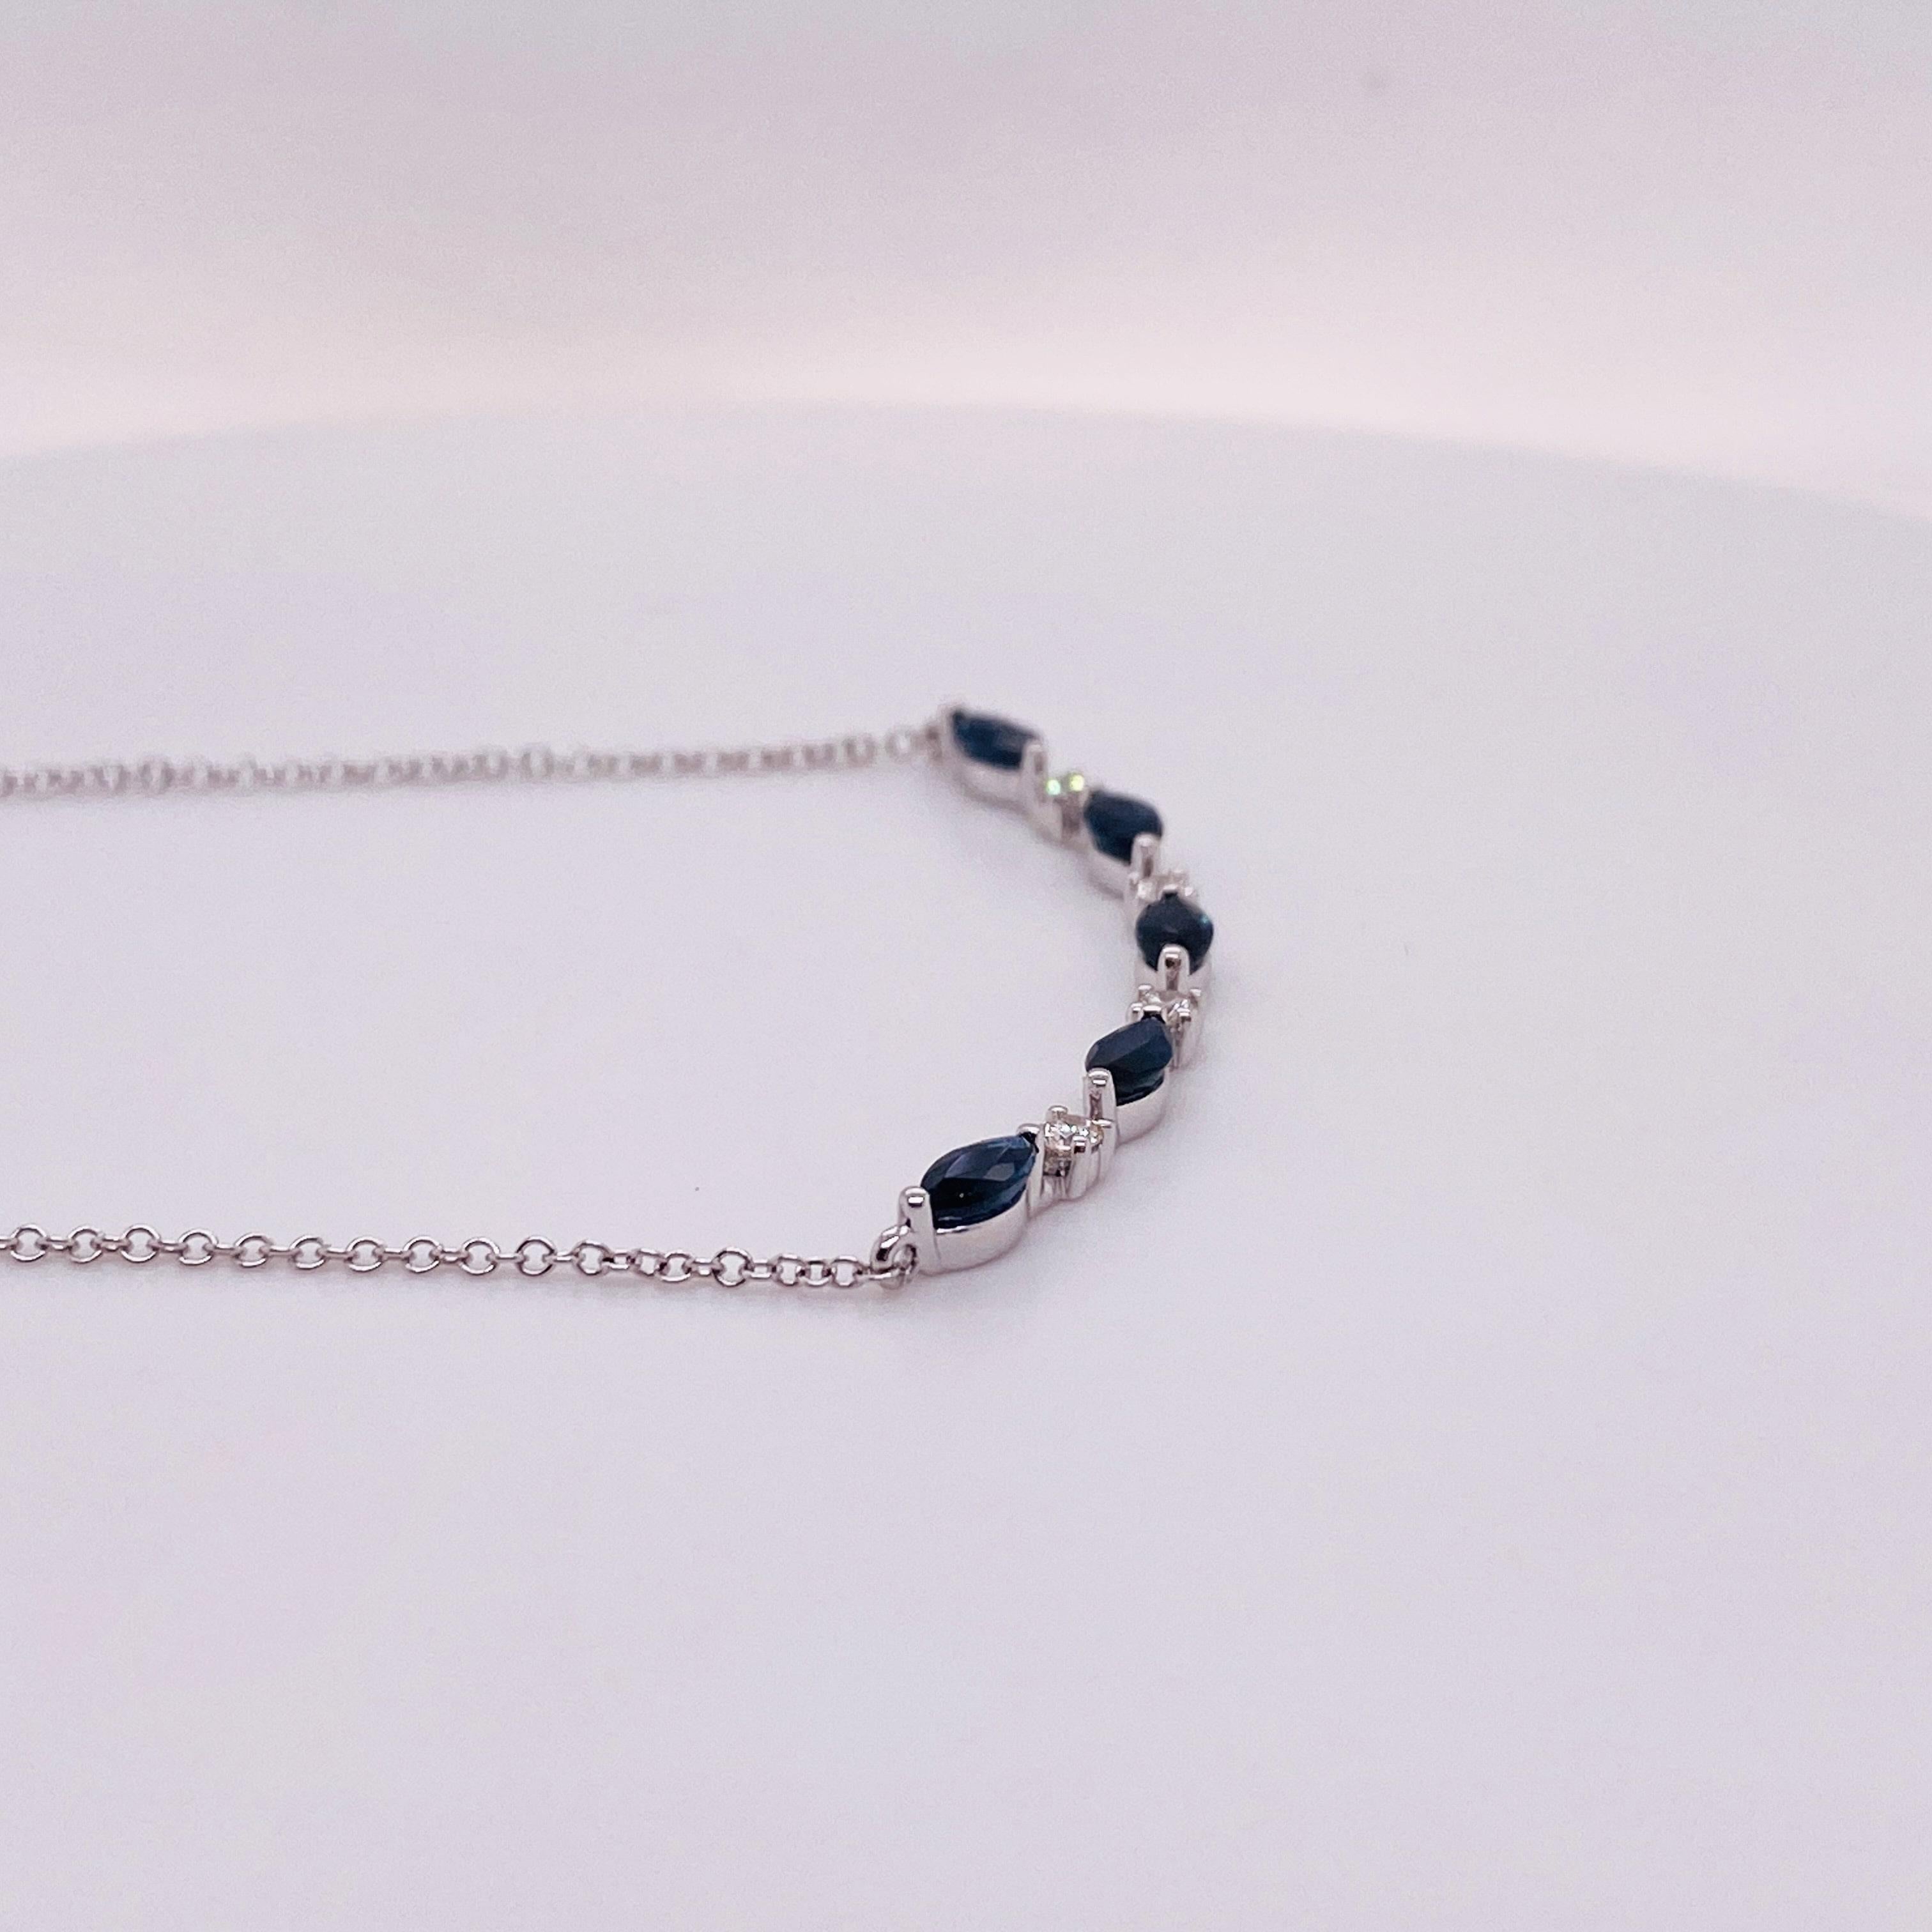 Grace your loved one's neck with this perfect sapphire and diamond necklace! The gracefully curving bar looks great alone or stacked with other favorite chains. Sapphires are September's birthstone and this could make a fabulous gift to your loved